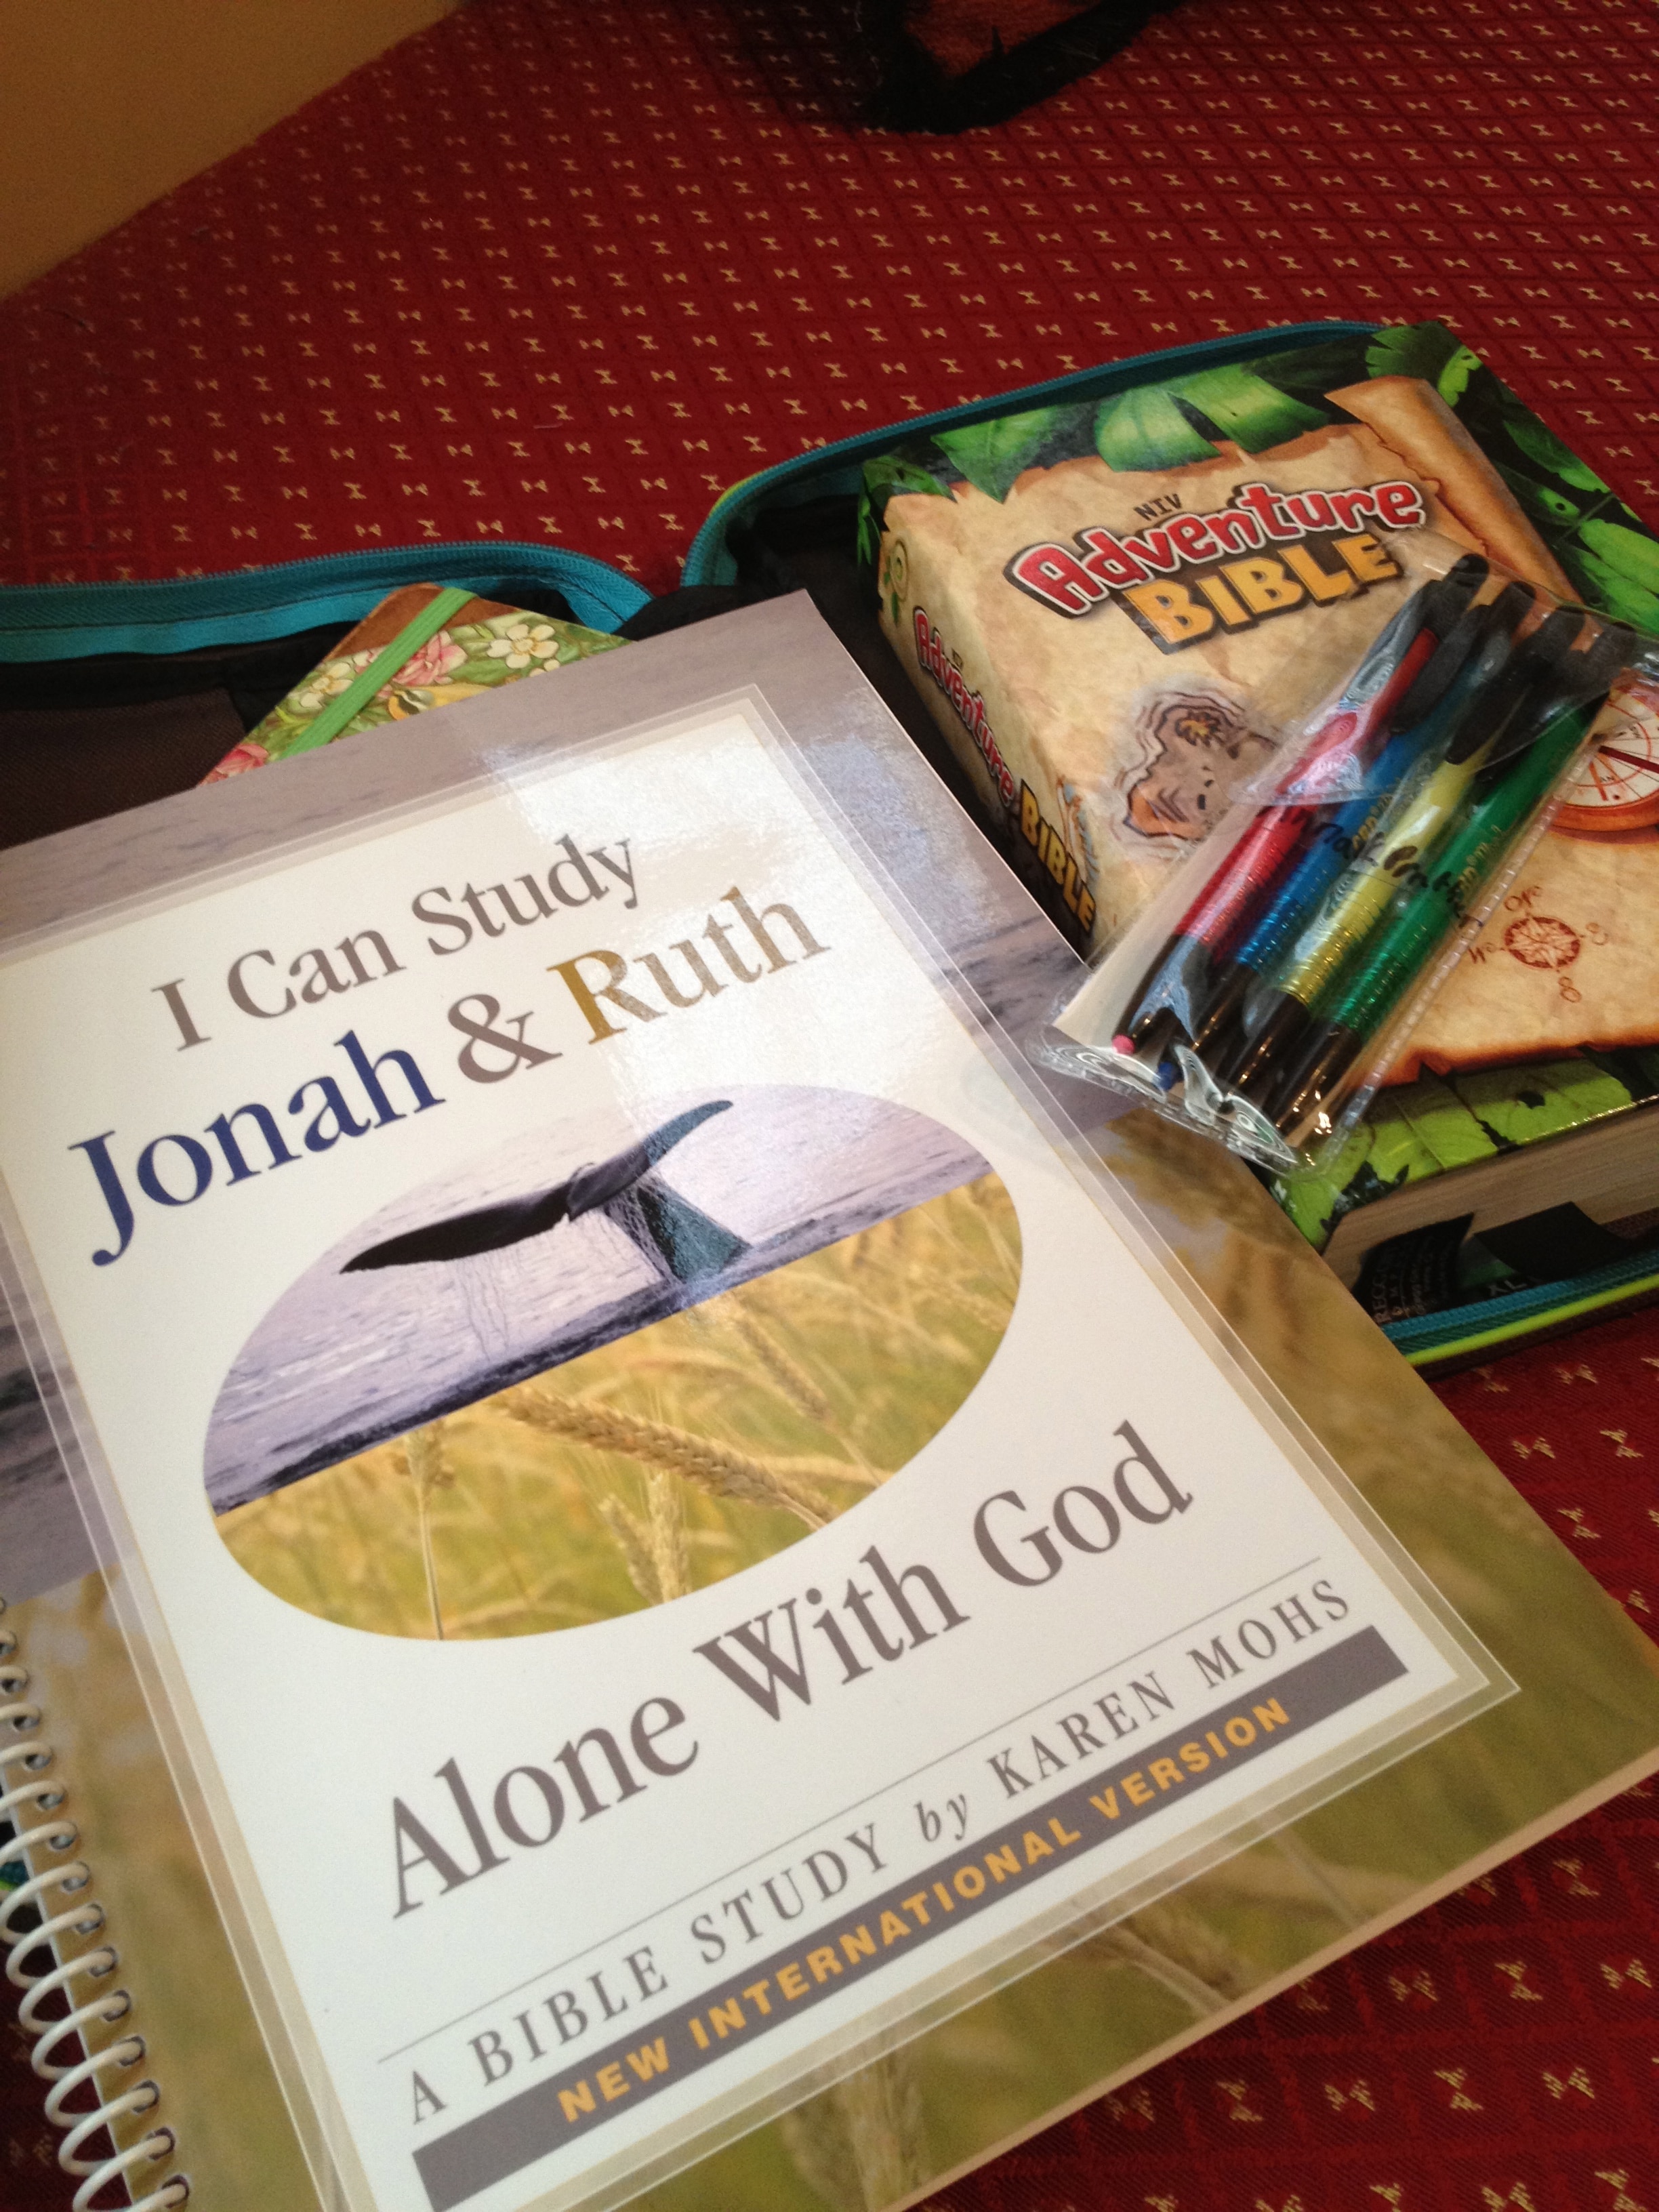 I Can Study Jonah & Ruth Alone With God